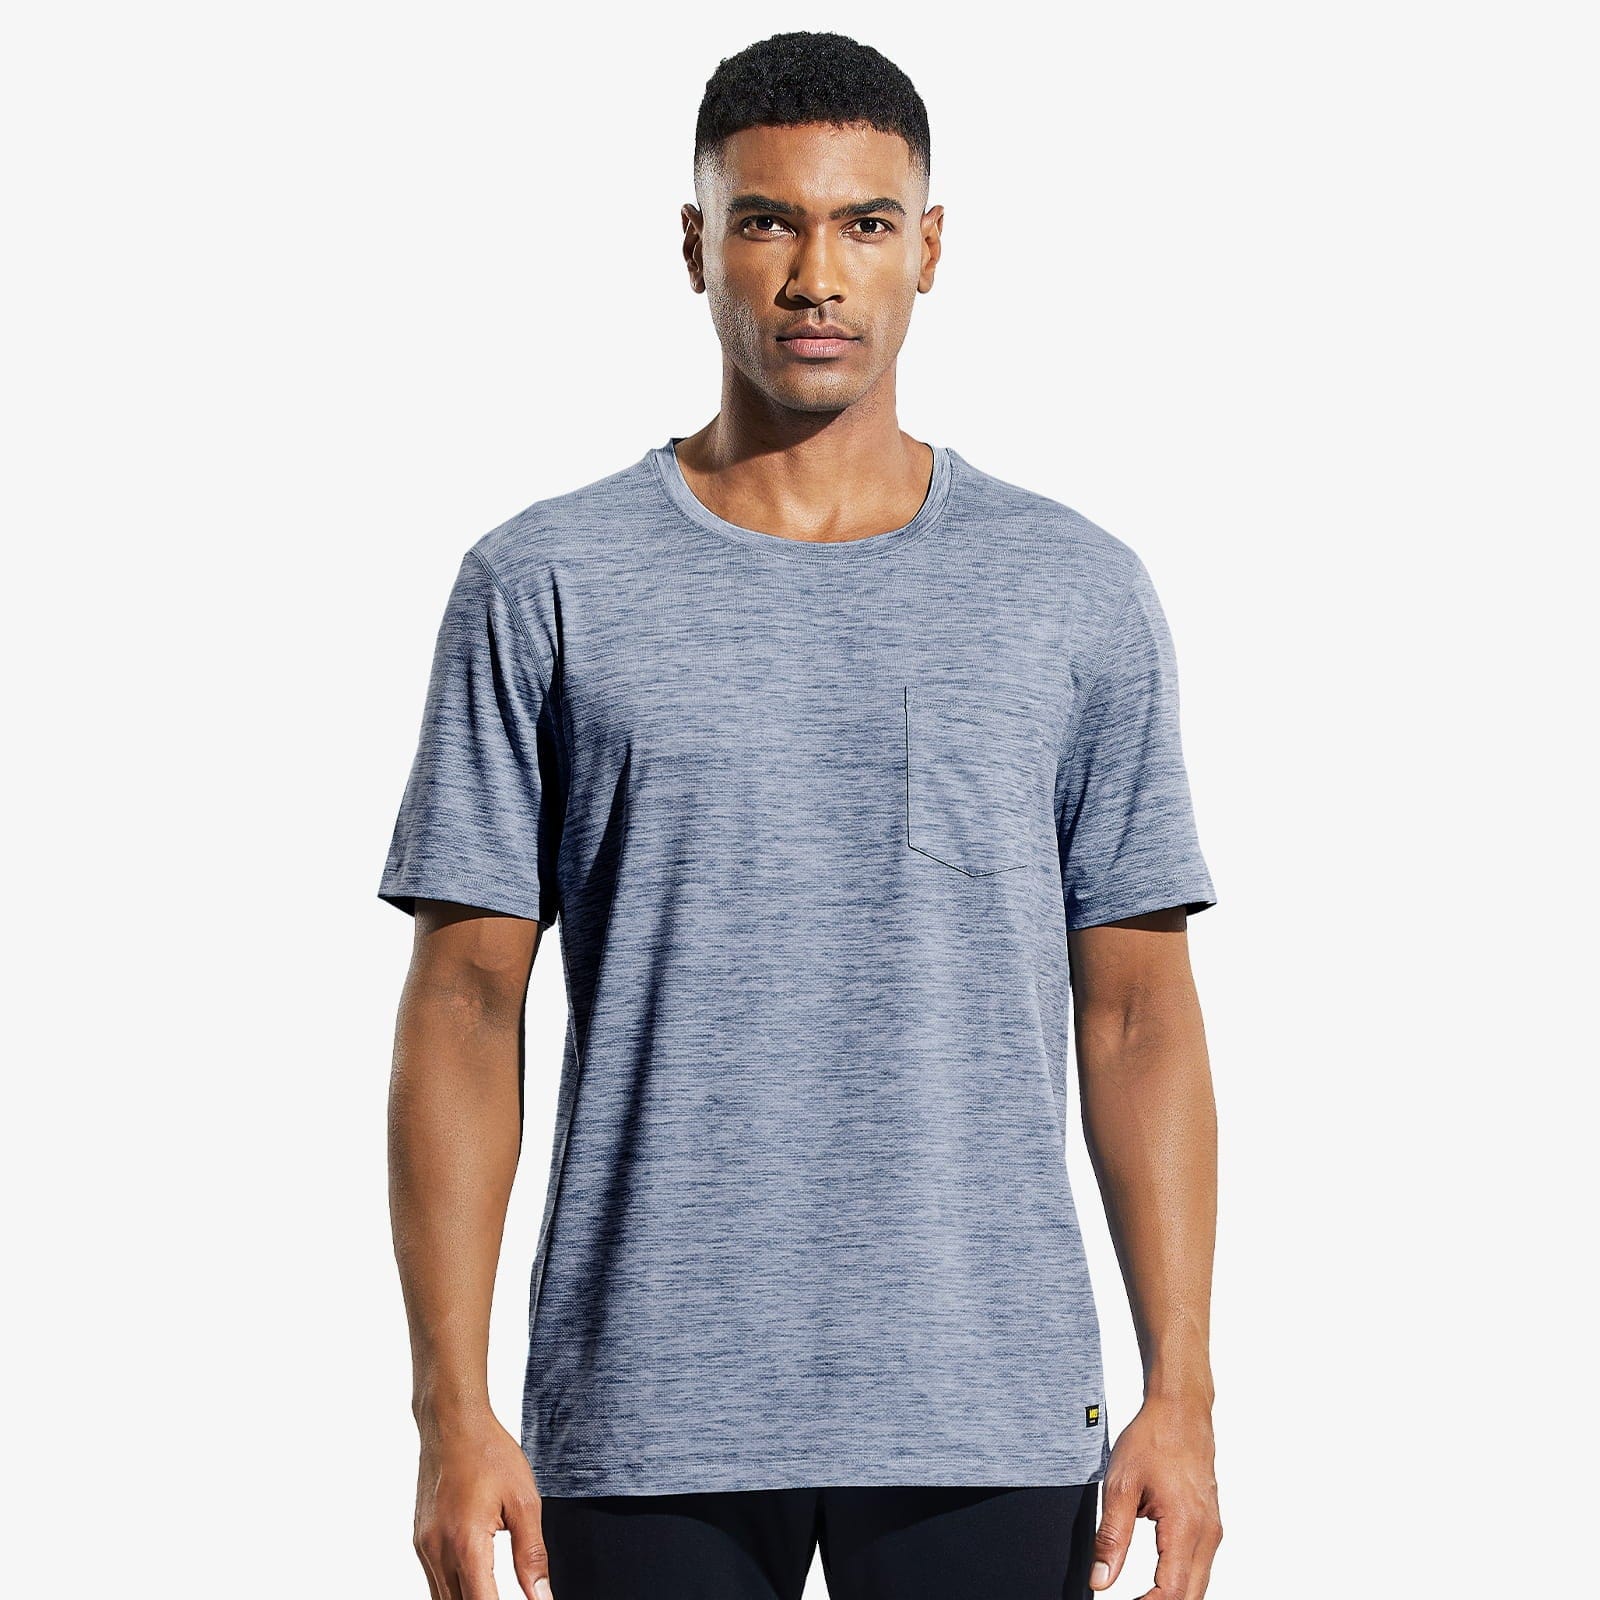 Men's Dry Fit Athletic T-Shirt with Pocket Men Shirts Heather Dusty Blue / S MIER